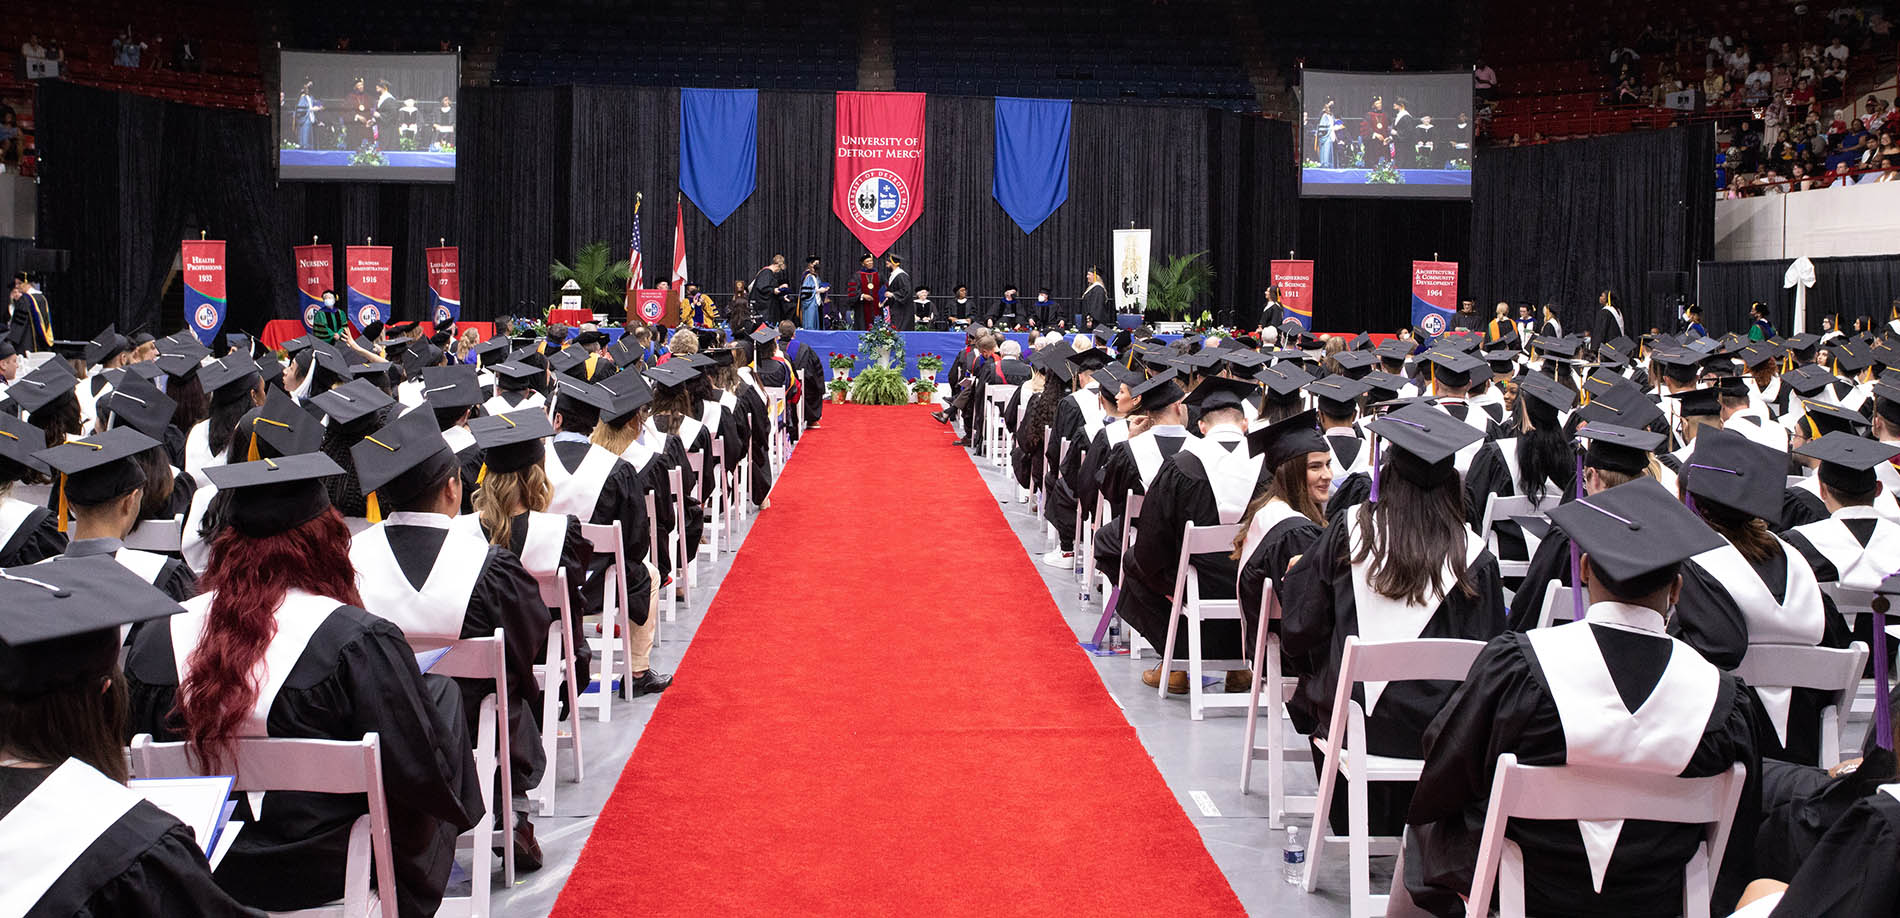 The graduates patiently wait in their seats while the other graduates receive their degrees on stage in Calihan Hall. A big red banner on stage reads, “University of Detroit Mercy.”